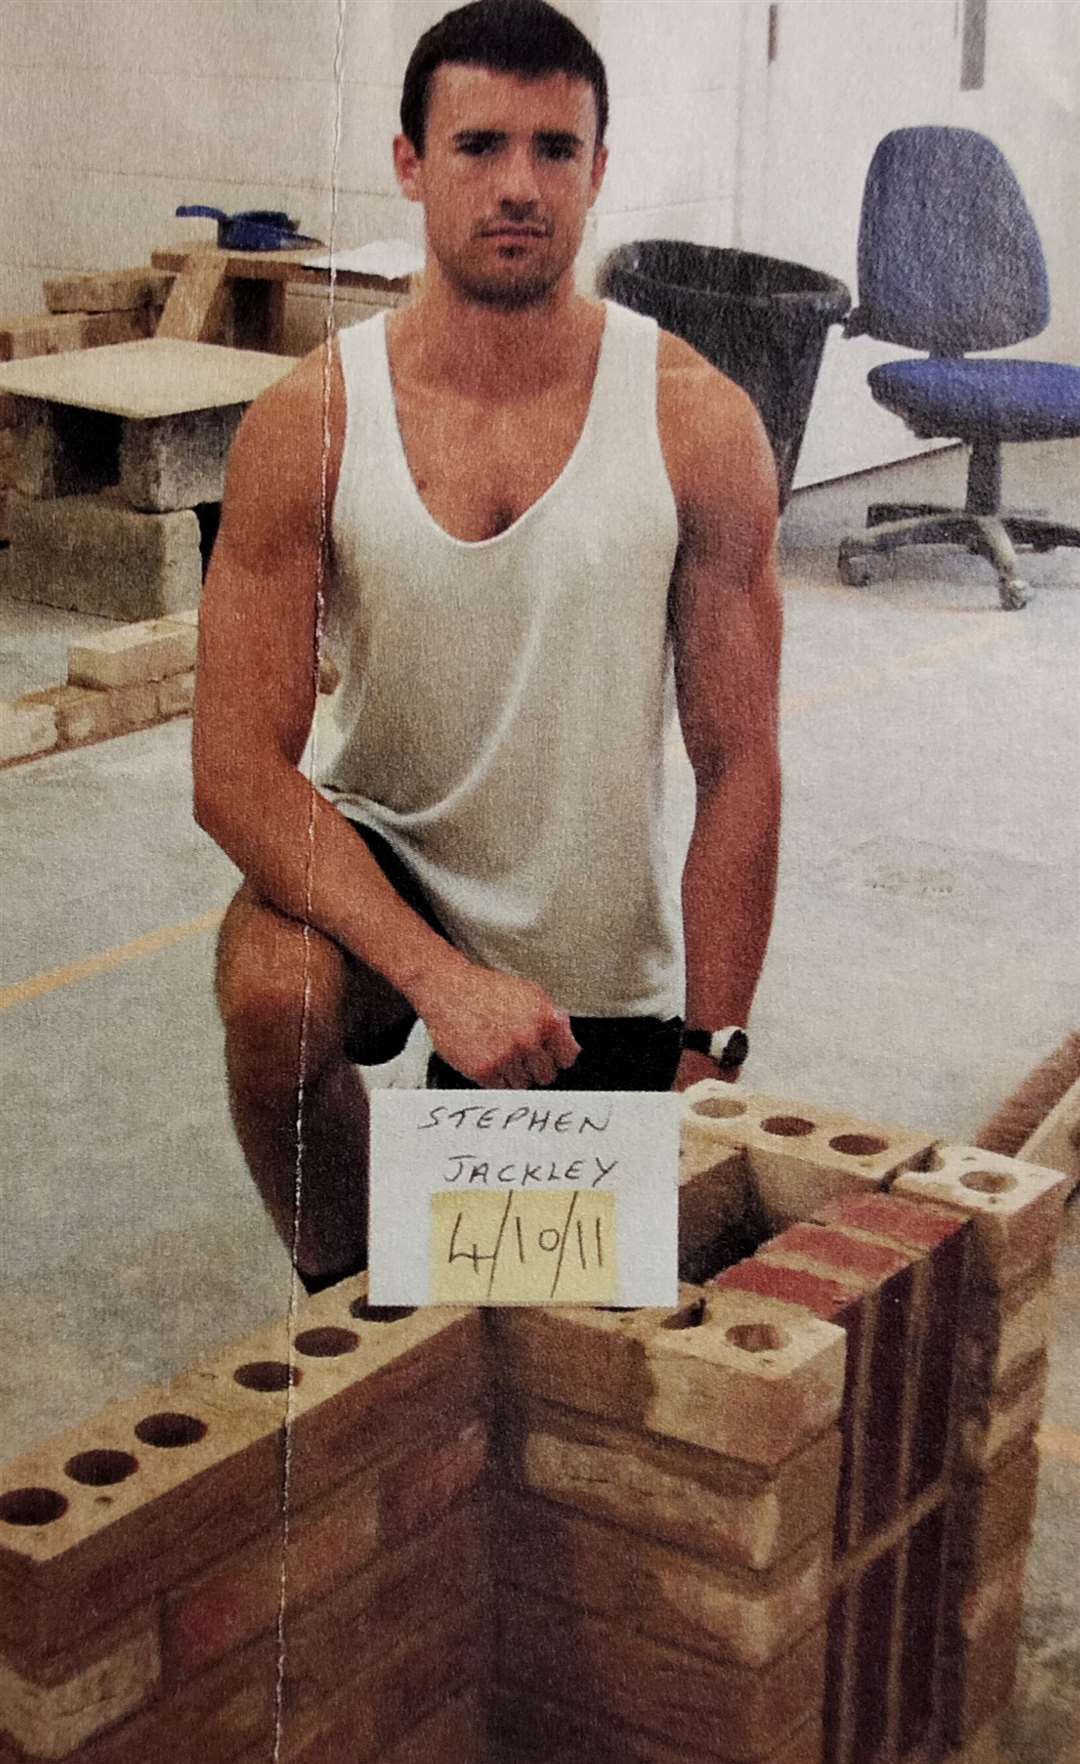 Stephen pictured in 2011, when he completed a bricklaying course